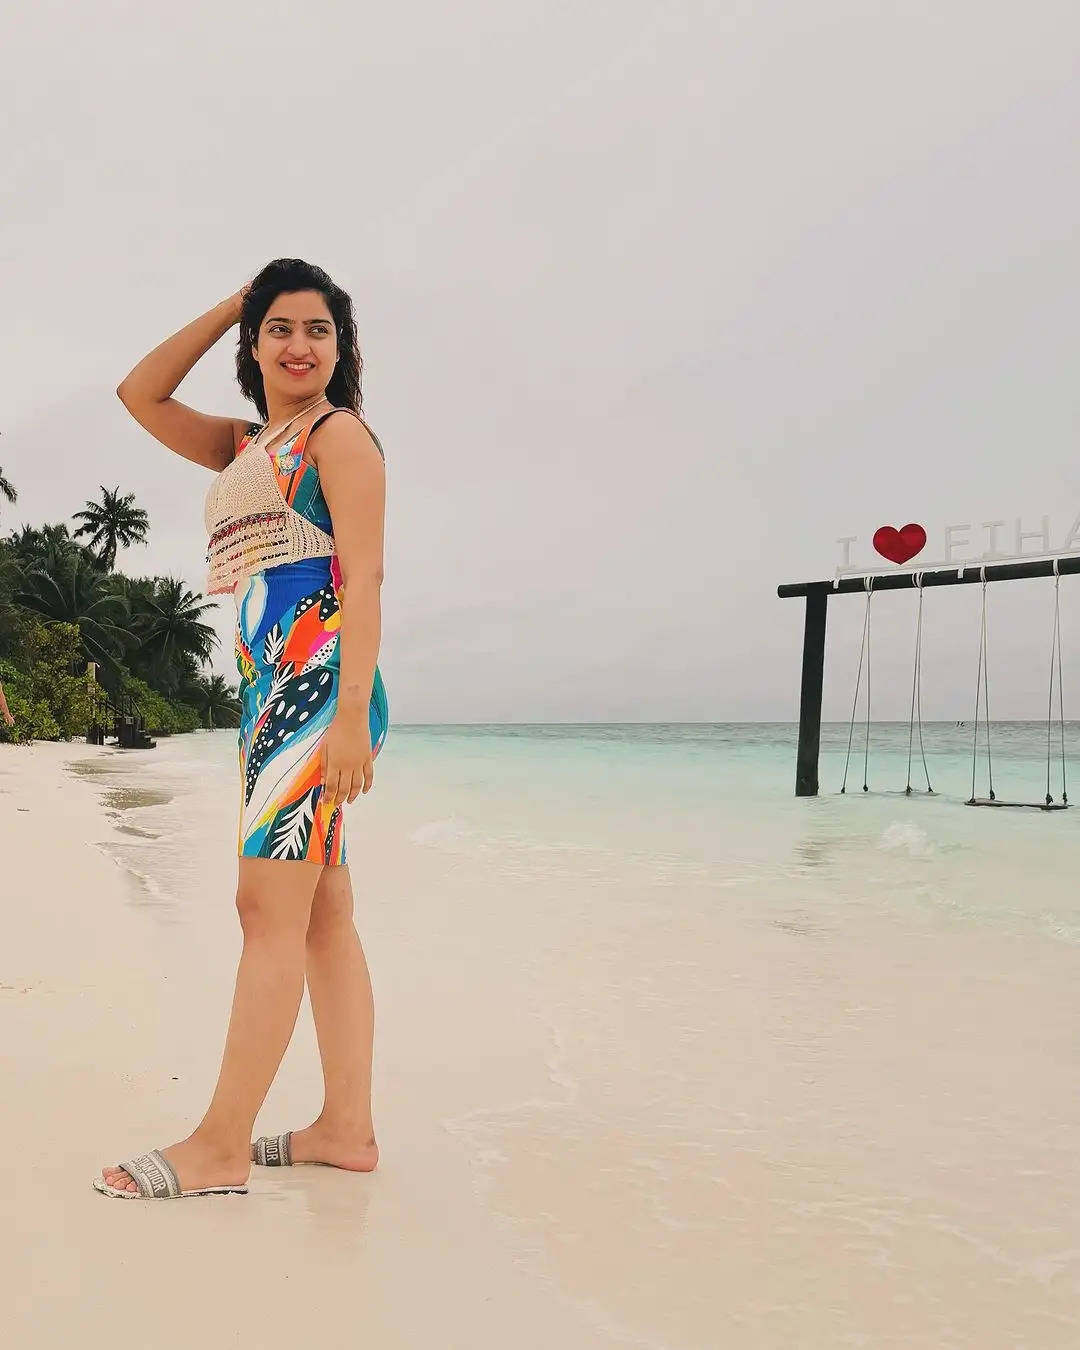 BIGG BOSS 17 Fame Sana Raees Khan Rings In Her New Celebration In Maldives, Shares Stunning Pictures From Her Trip